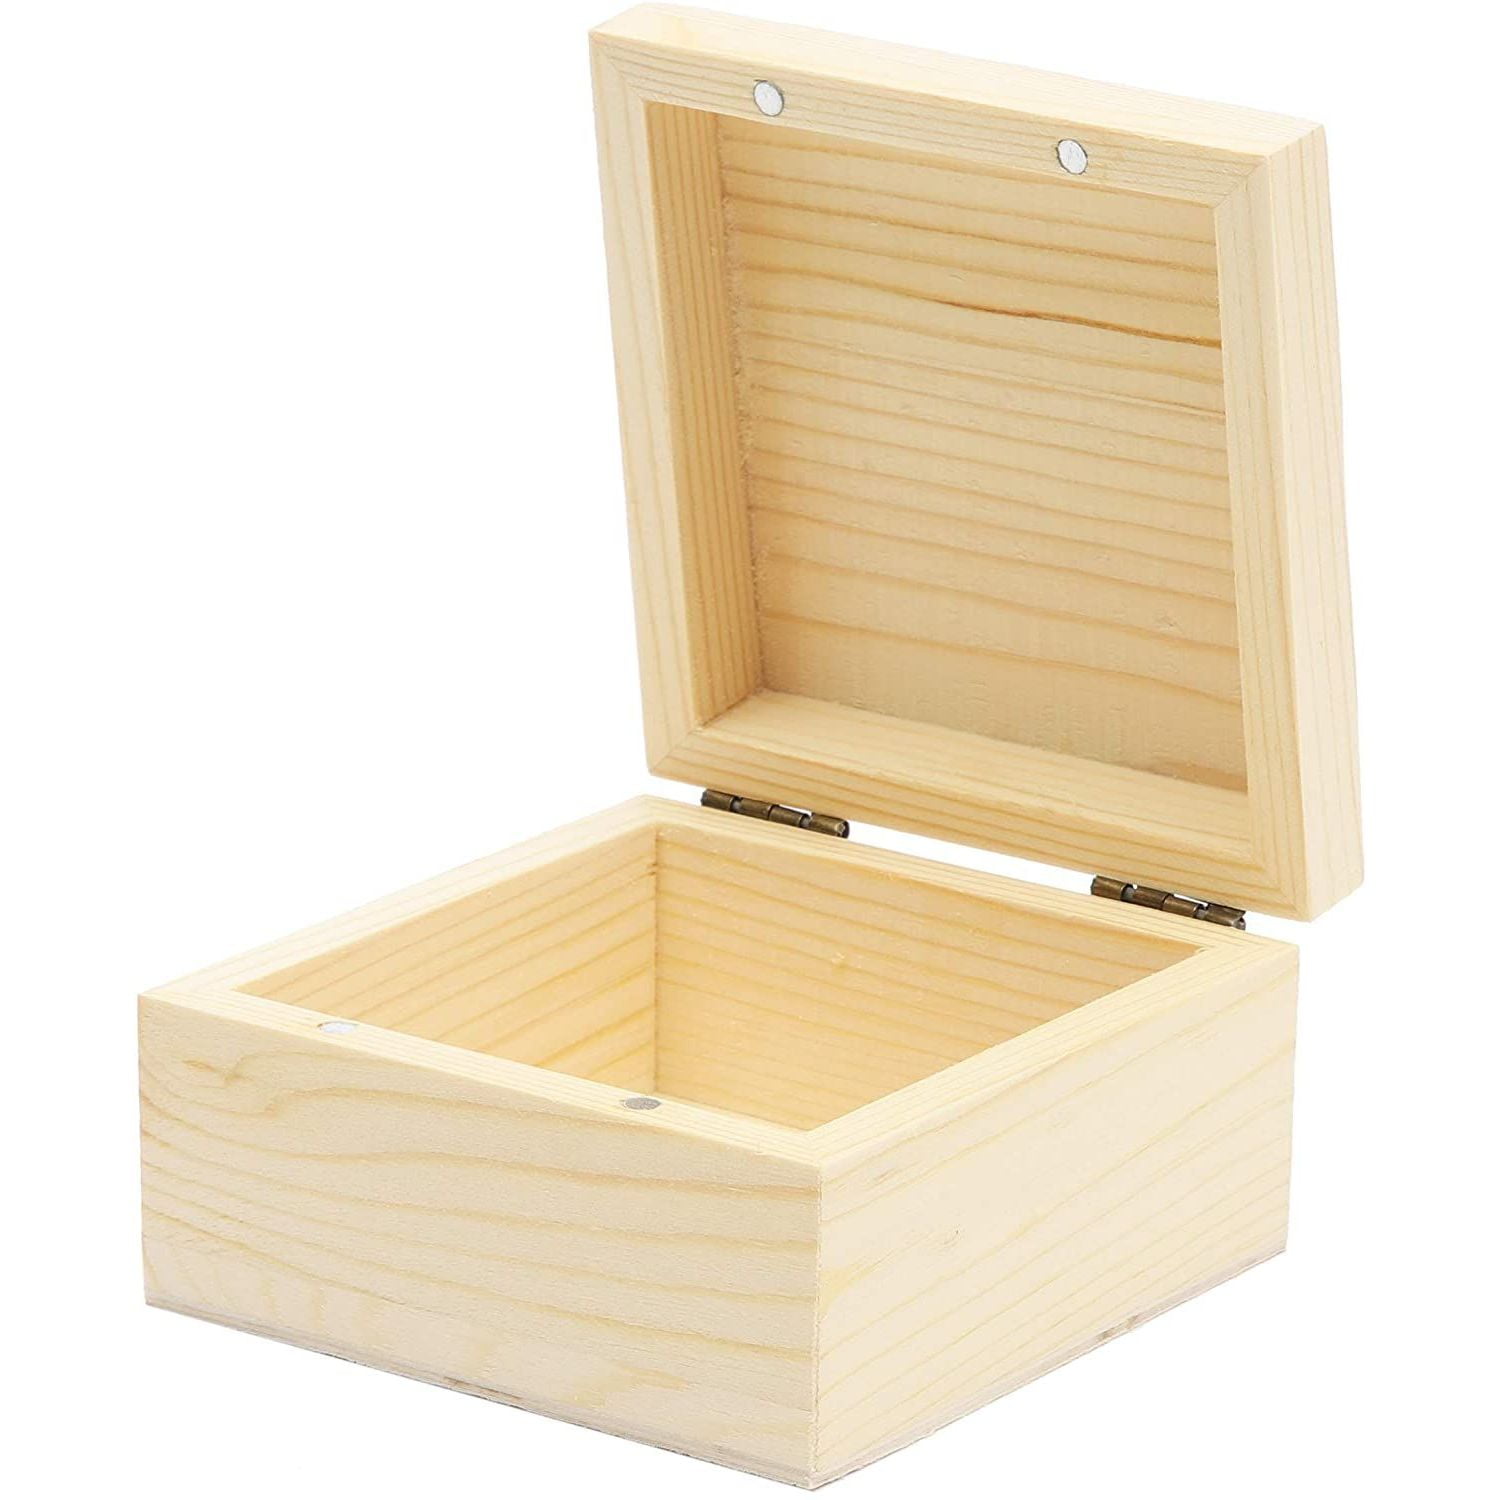 View Does Walmart Sell Wooden Boxes Pictures